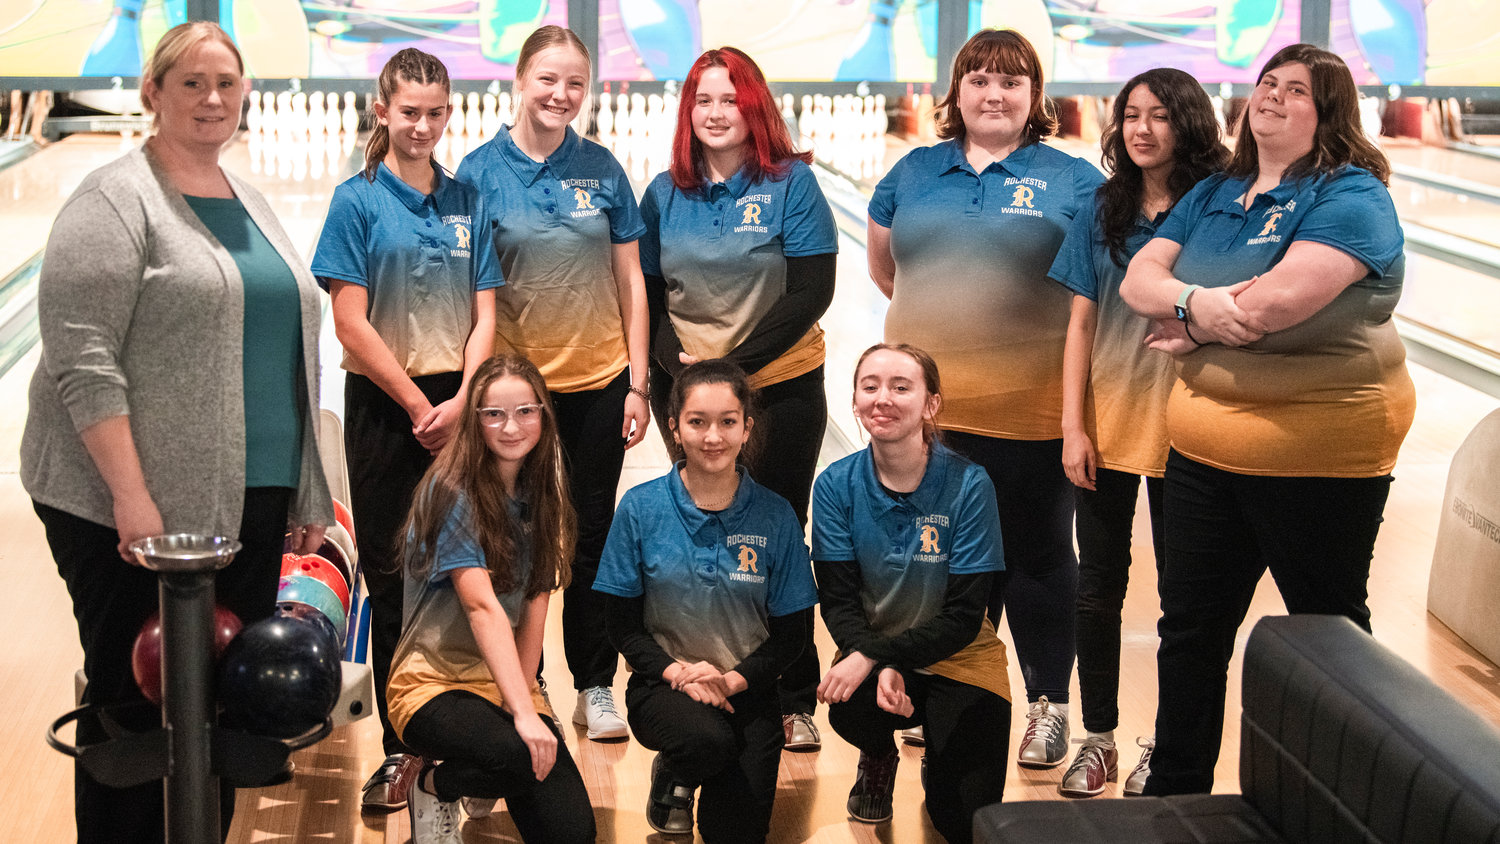 The Rochester High School bowling team poses for a photo at Fairway Lanes in Centralia Nov. 10.